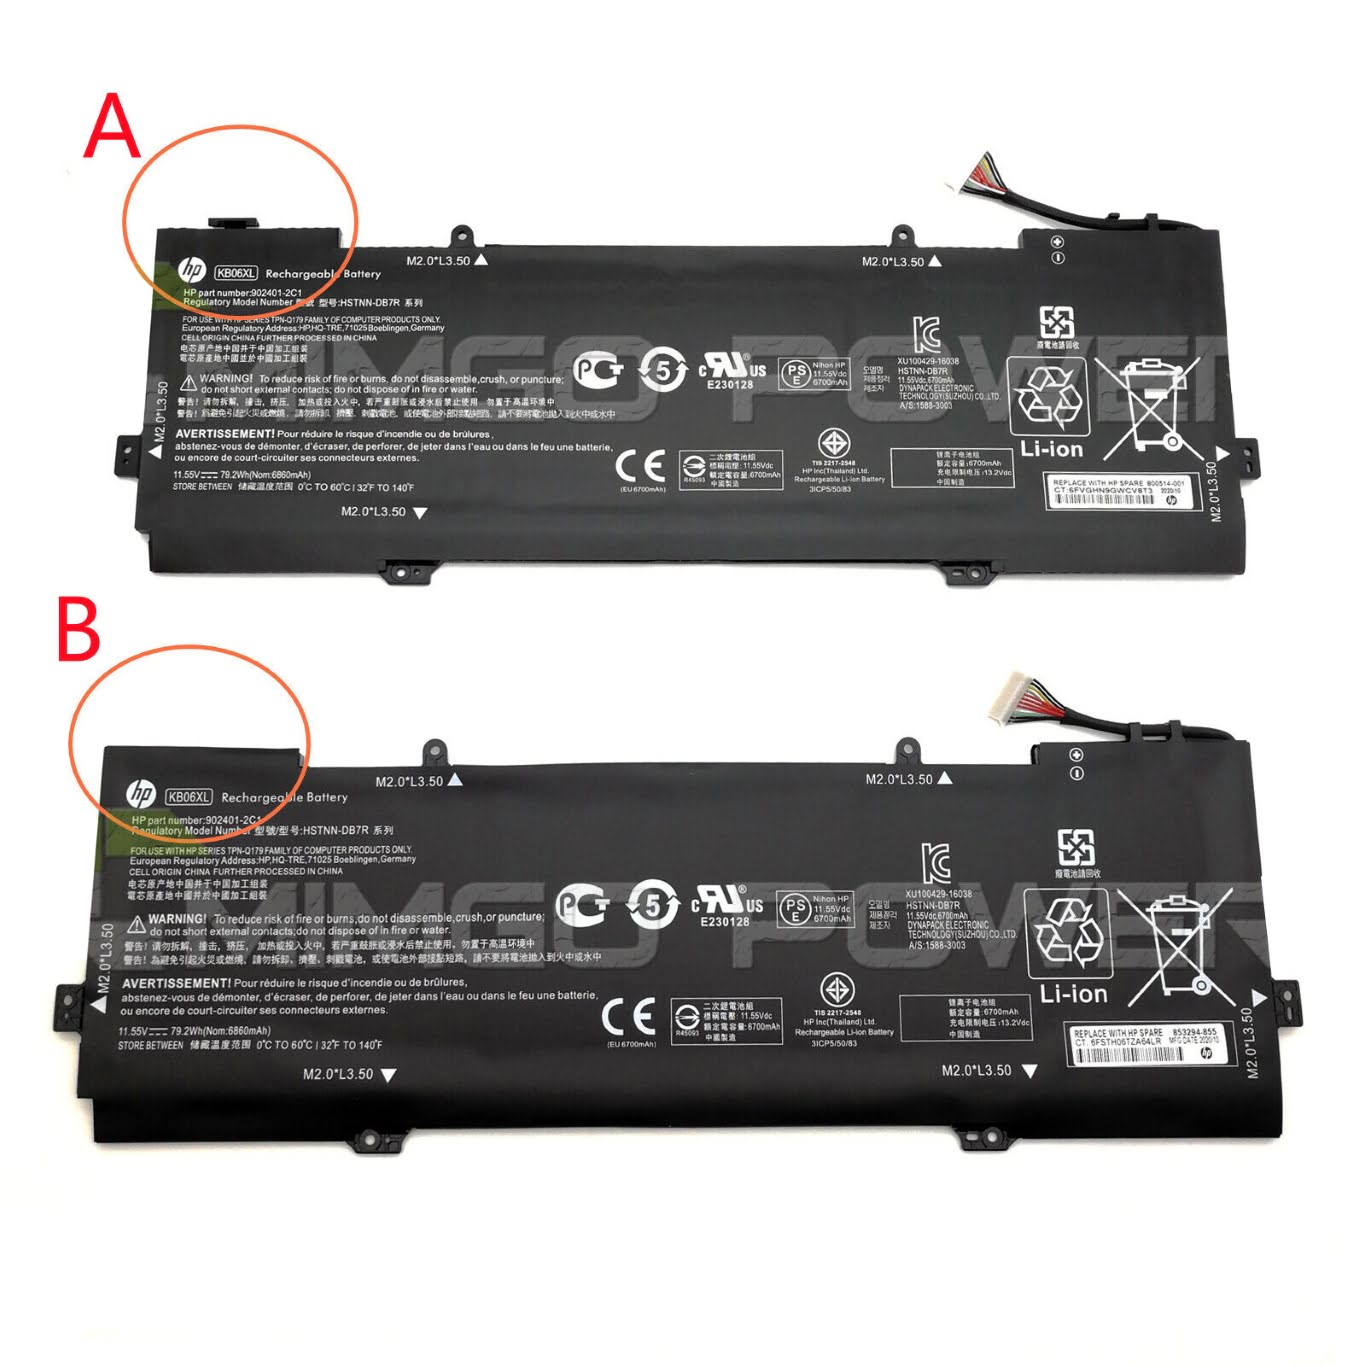 902401-2C1, 902499-855 replacement Laptop Battery for HP Spectre x360 15-b, Spectre x360 15-bl000, 11.55v, 79.2wh, 6 cells